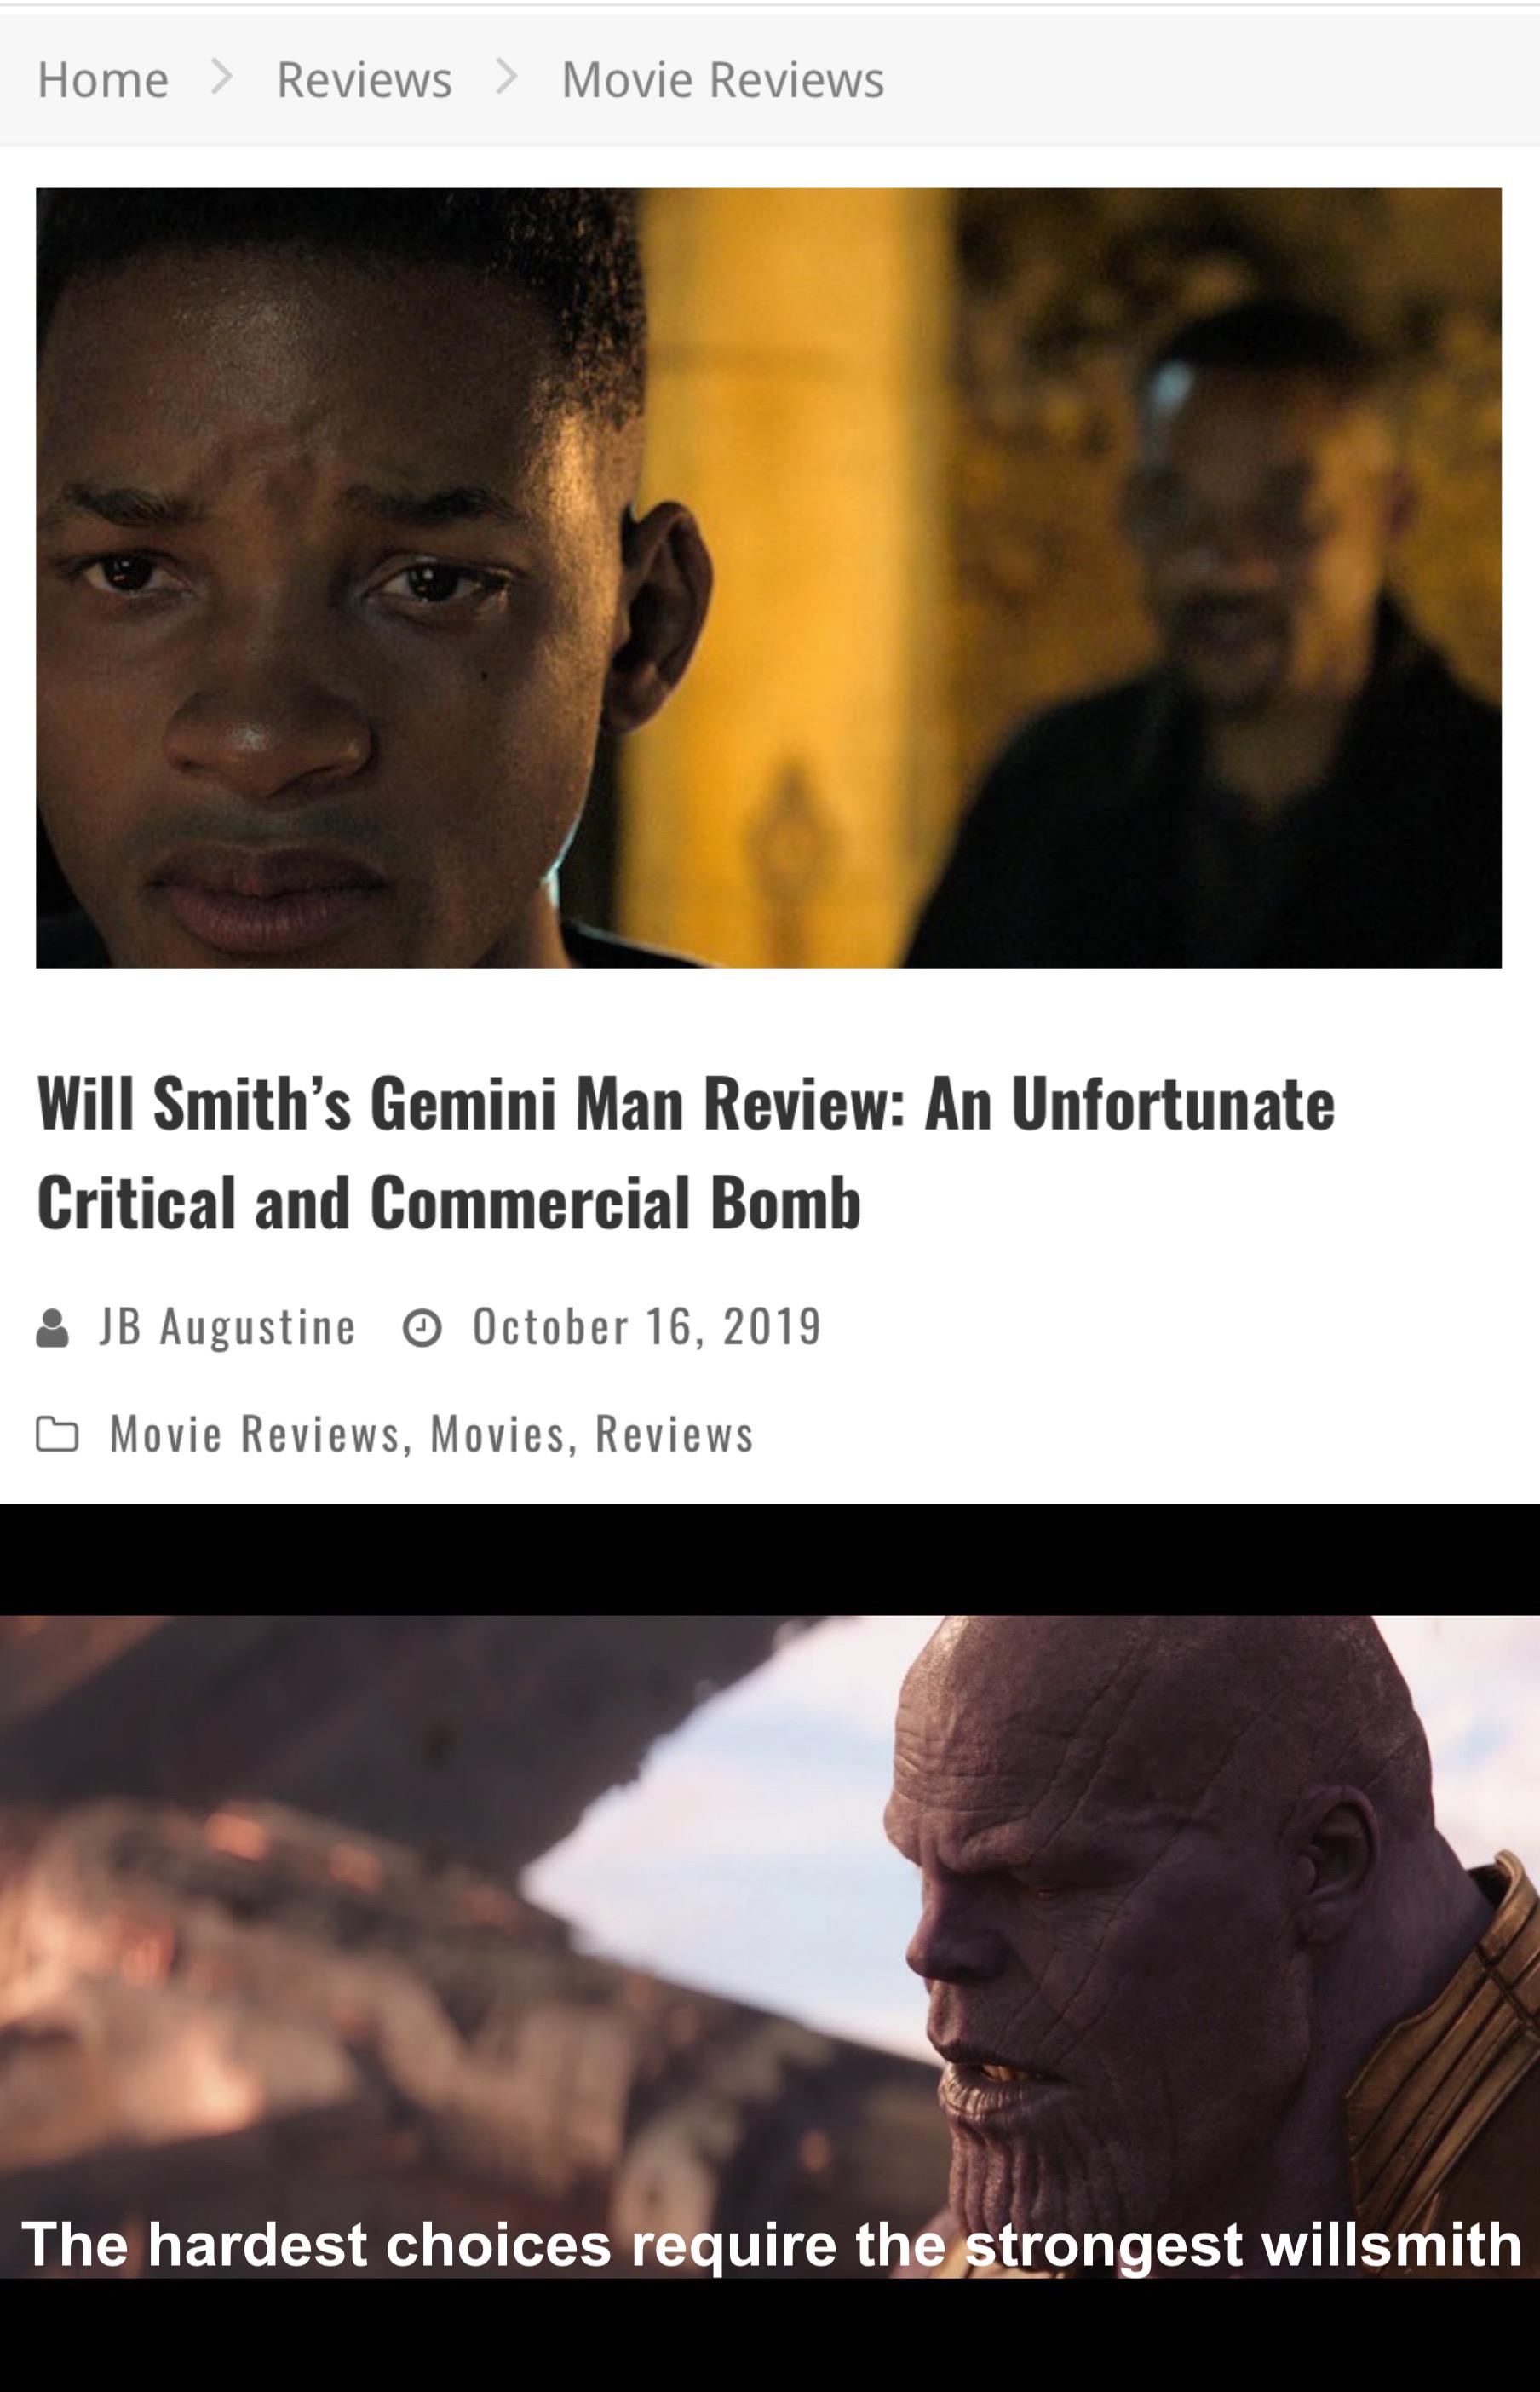 thanos avengers-memes thanos text: Home Reviews Movie Reviews Will Smith's Gemini Man Review: An Unfortunate Critical and Commercial Bomb a JB Augustine @ October 16, 2019 b Movie Reviews, Movies, Reviews The hardest choices require thestcongest willsmith 